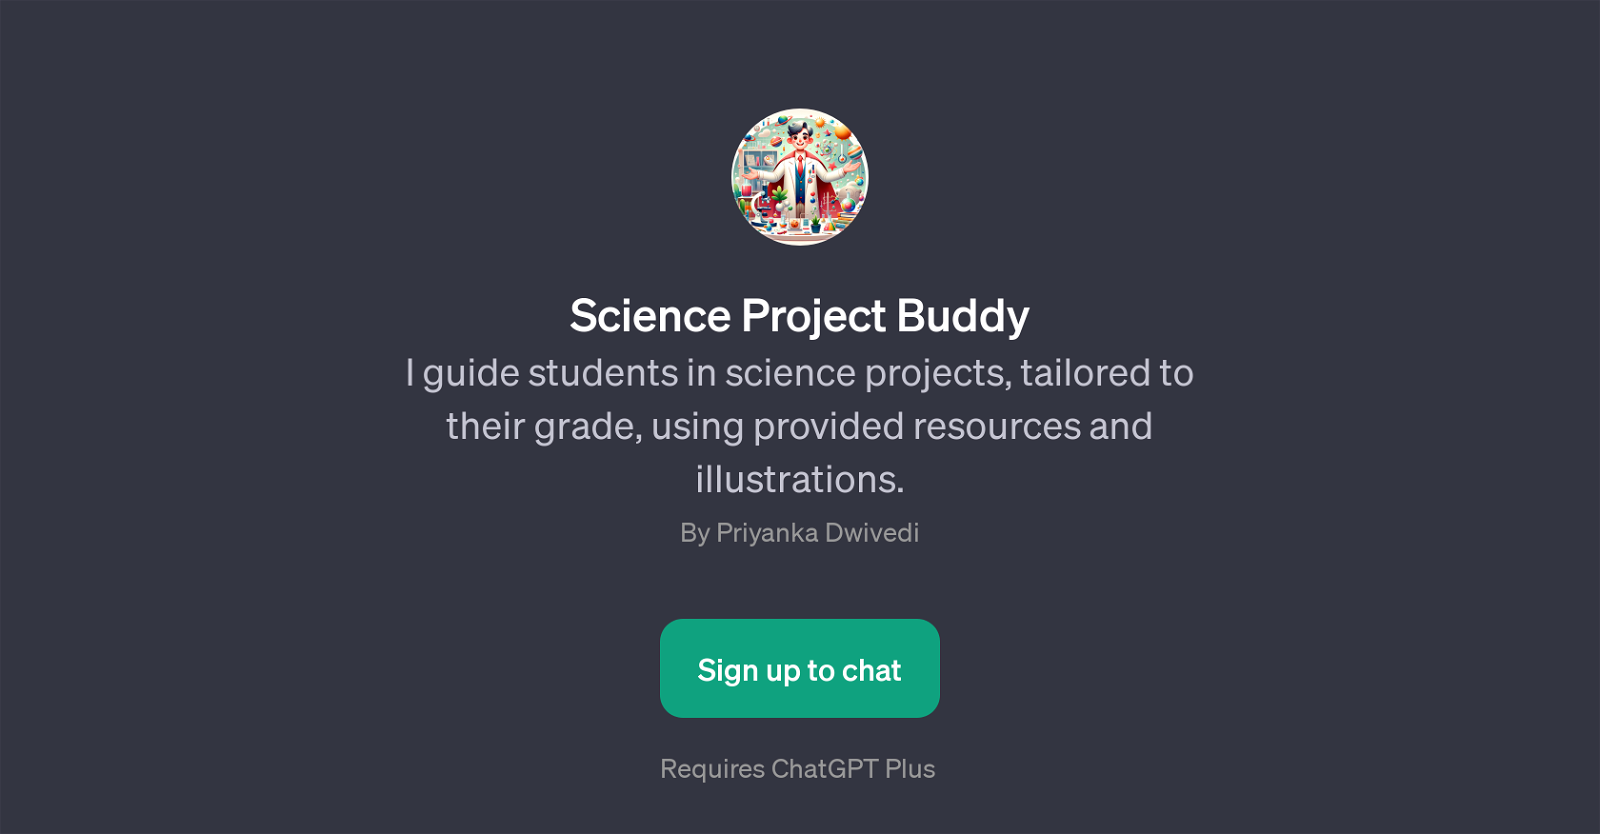 Science Project Buddy website